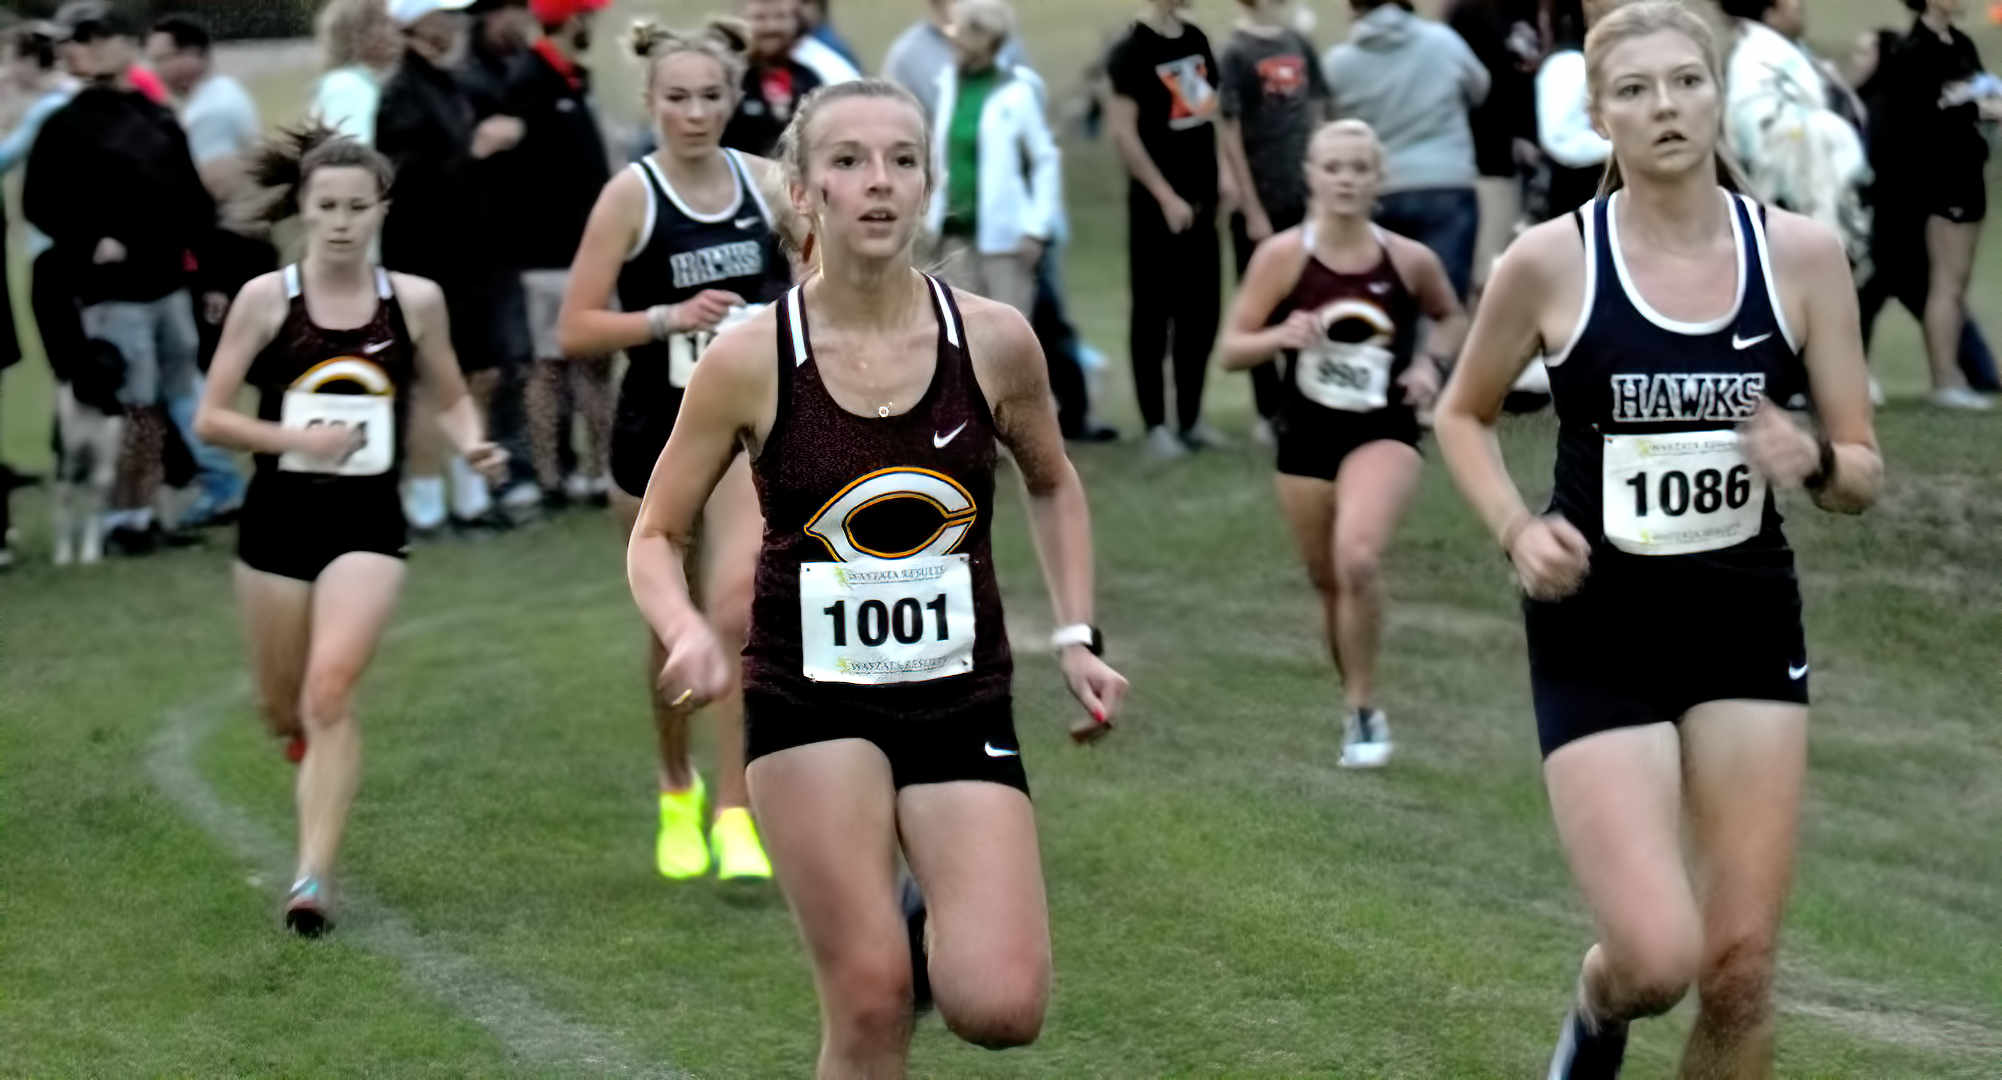 Senior Emily Rugloski races through the opening loop at the annual MSU Moorhead Twilight Meet. She led the Cobbers with a time of 15:11.8.